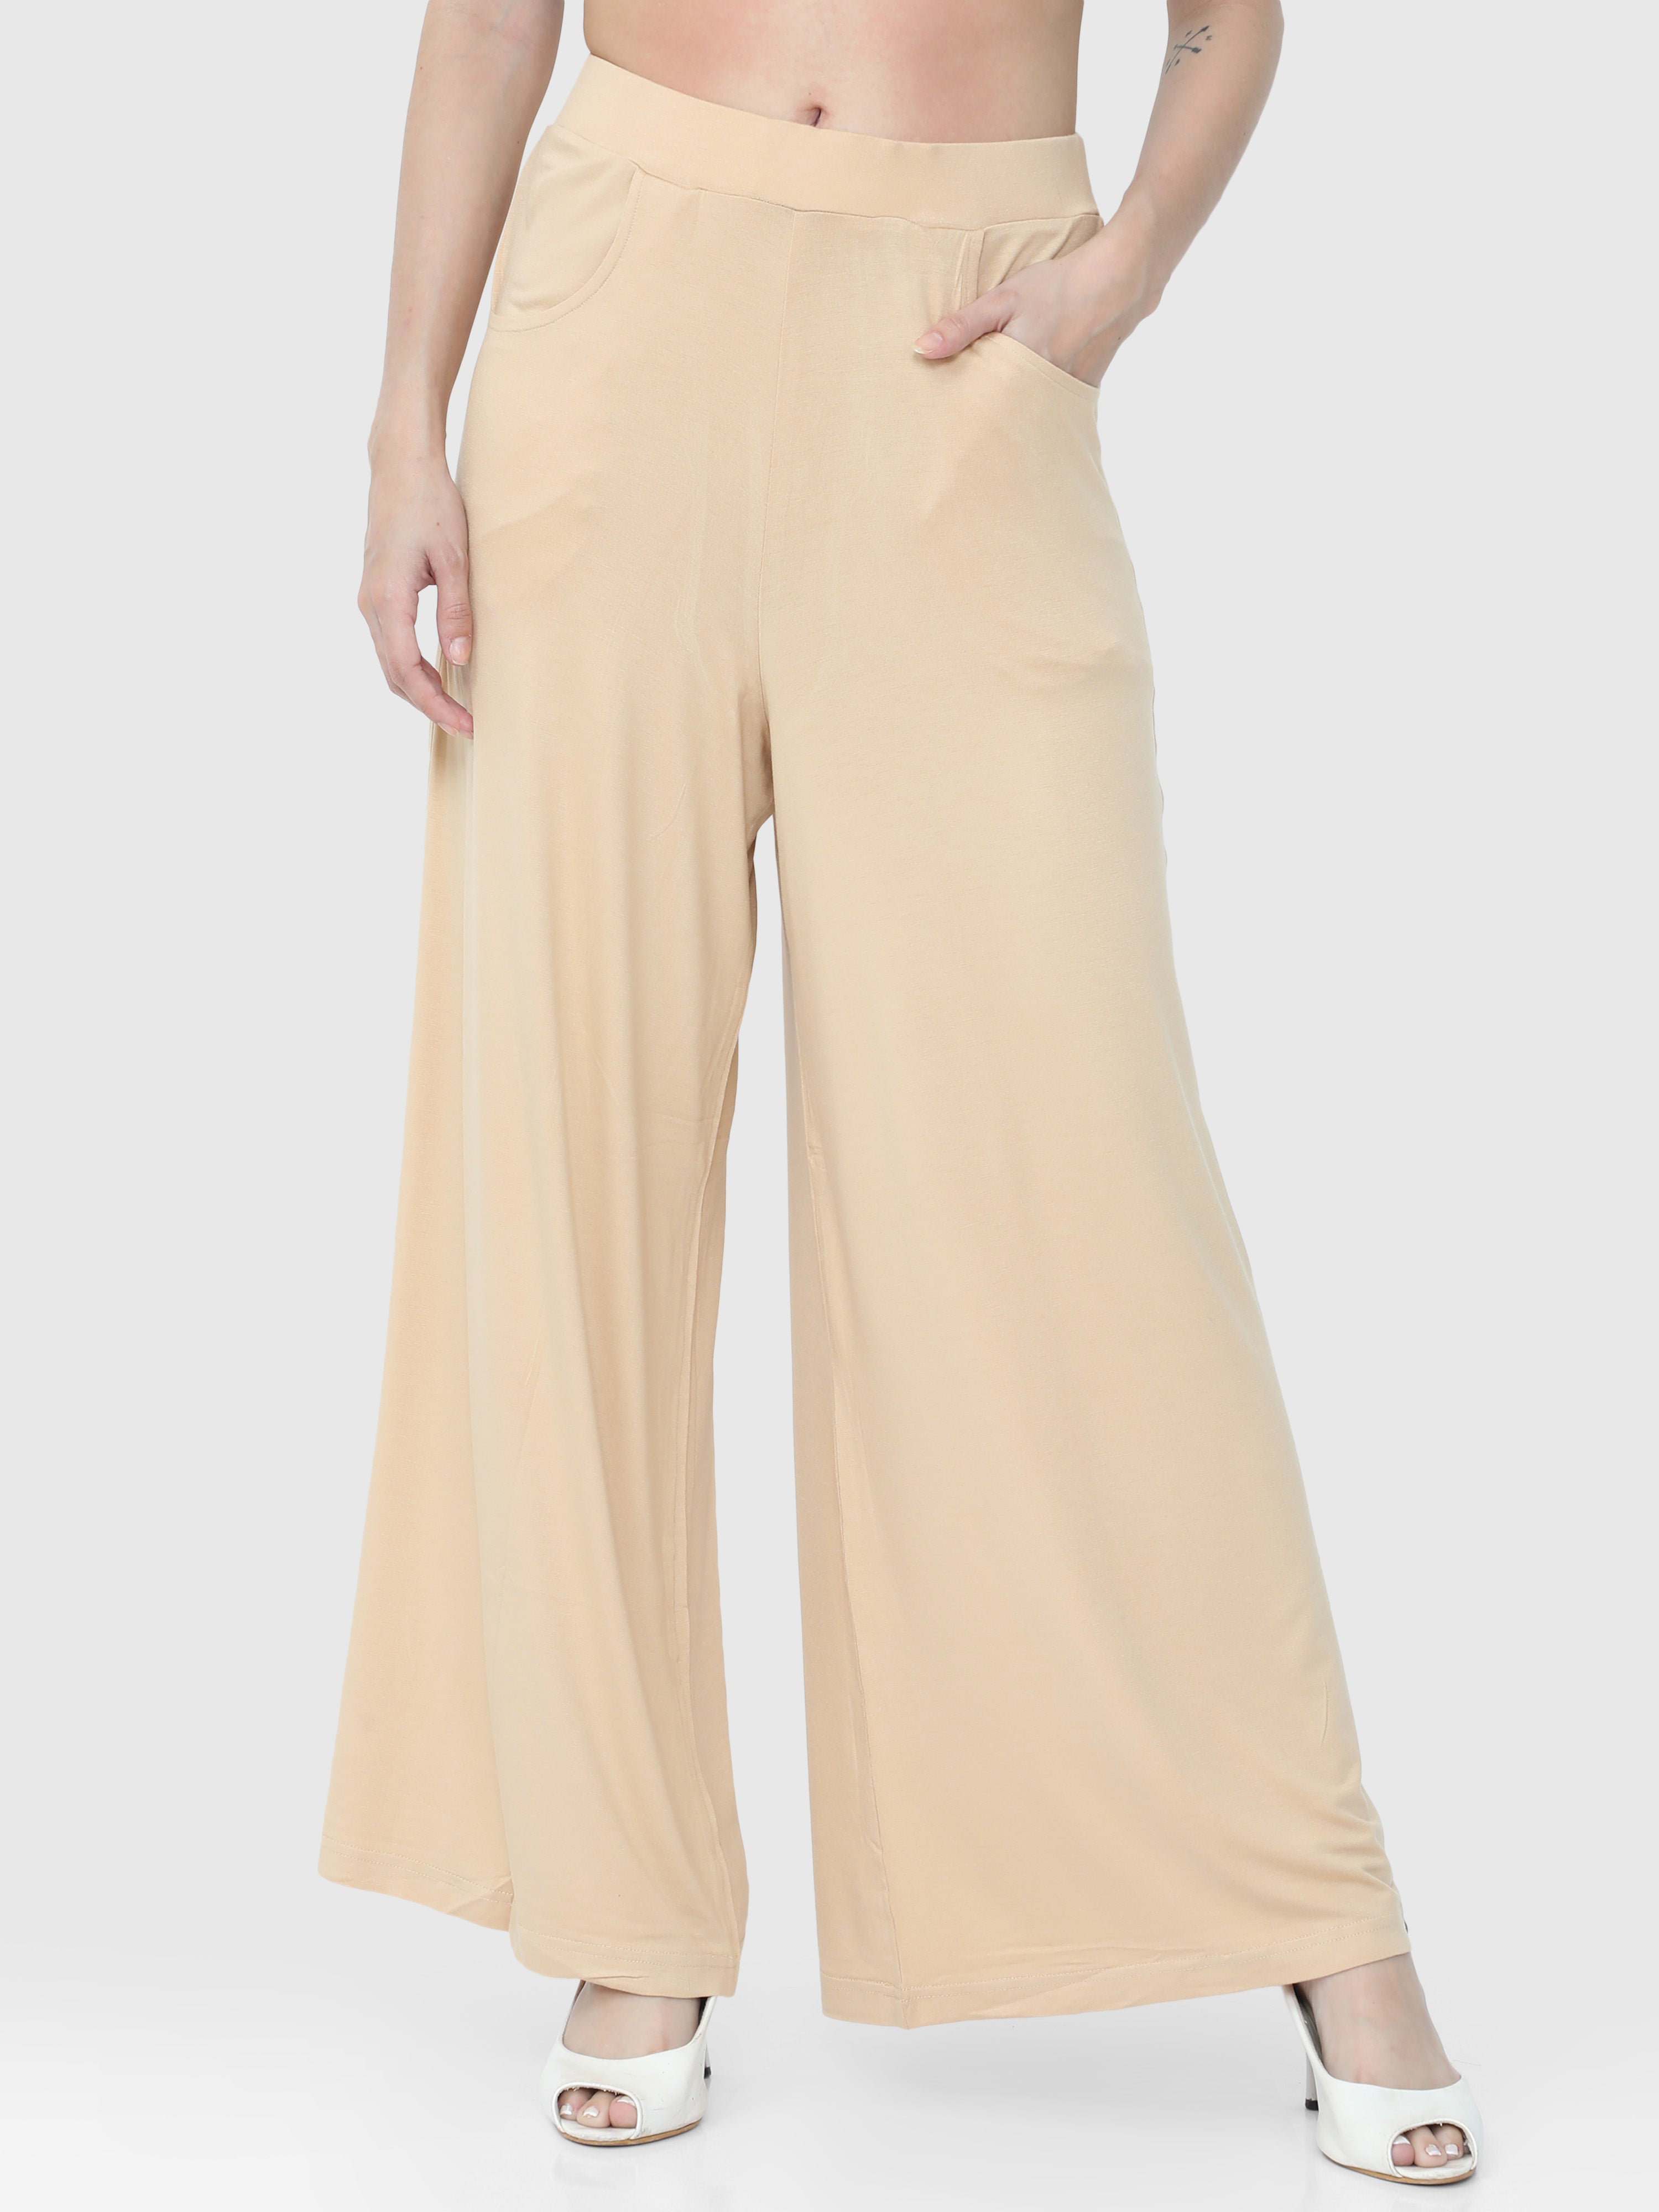 Full Palazzo Pants and Blouse with Matching Collar (Mastoura Dress for  Veiled Women) - Cream and Rust Color Select size S